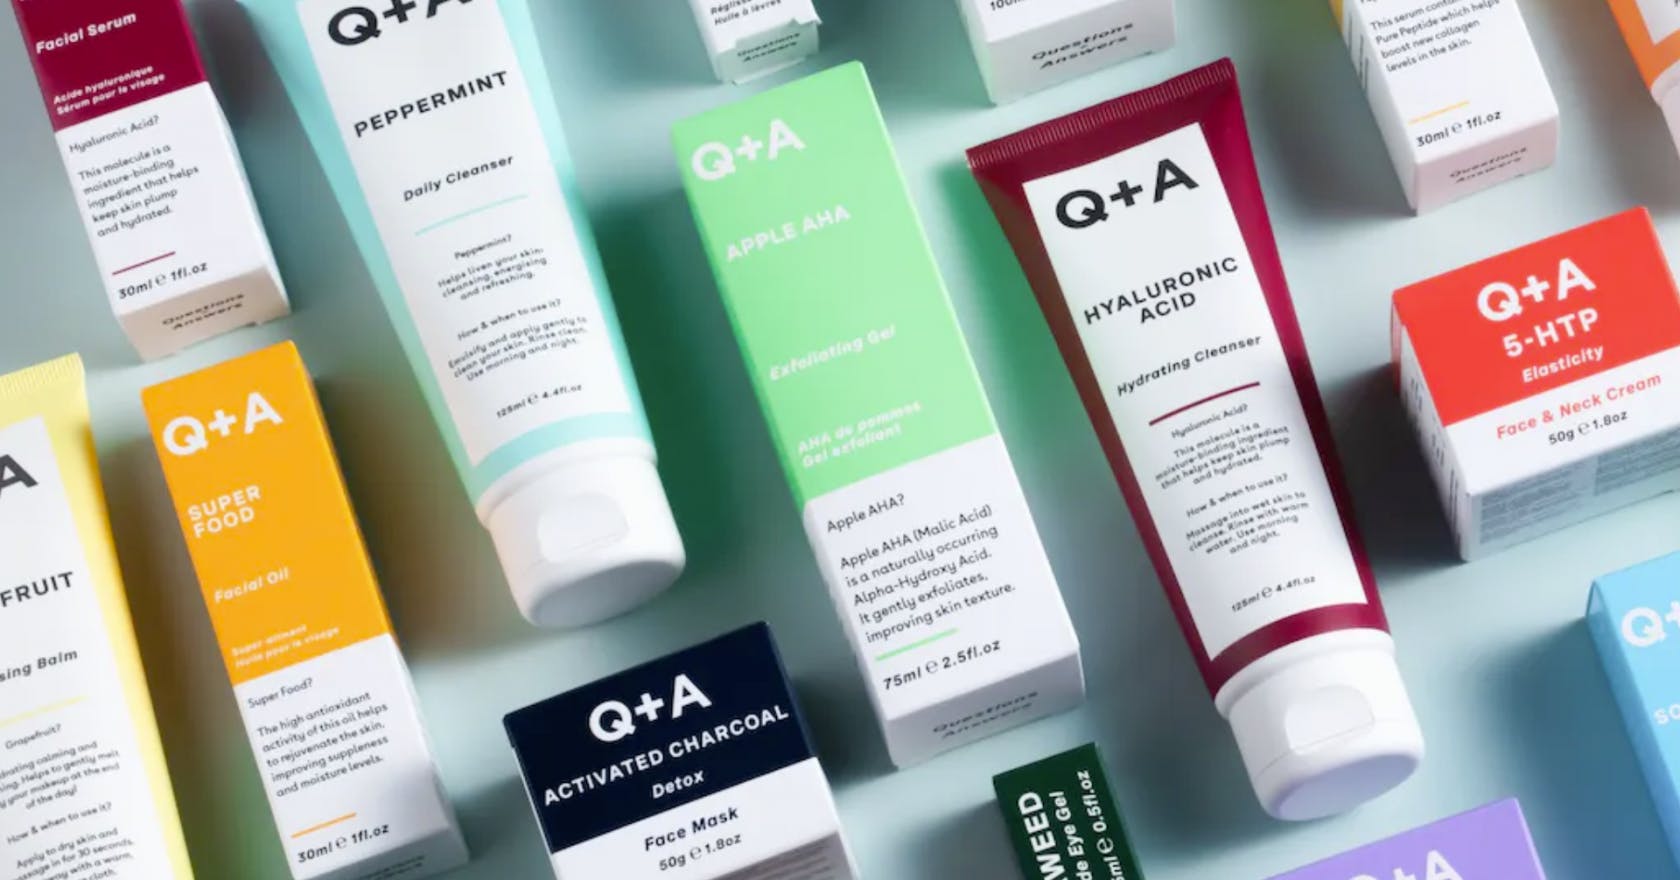 Q+A to freeze prices on skincare in cost of living crisis